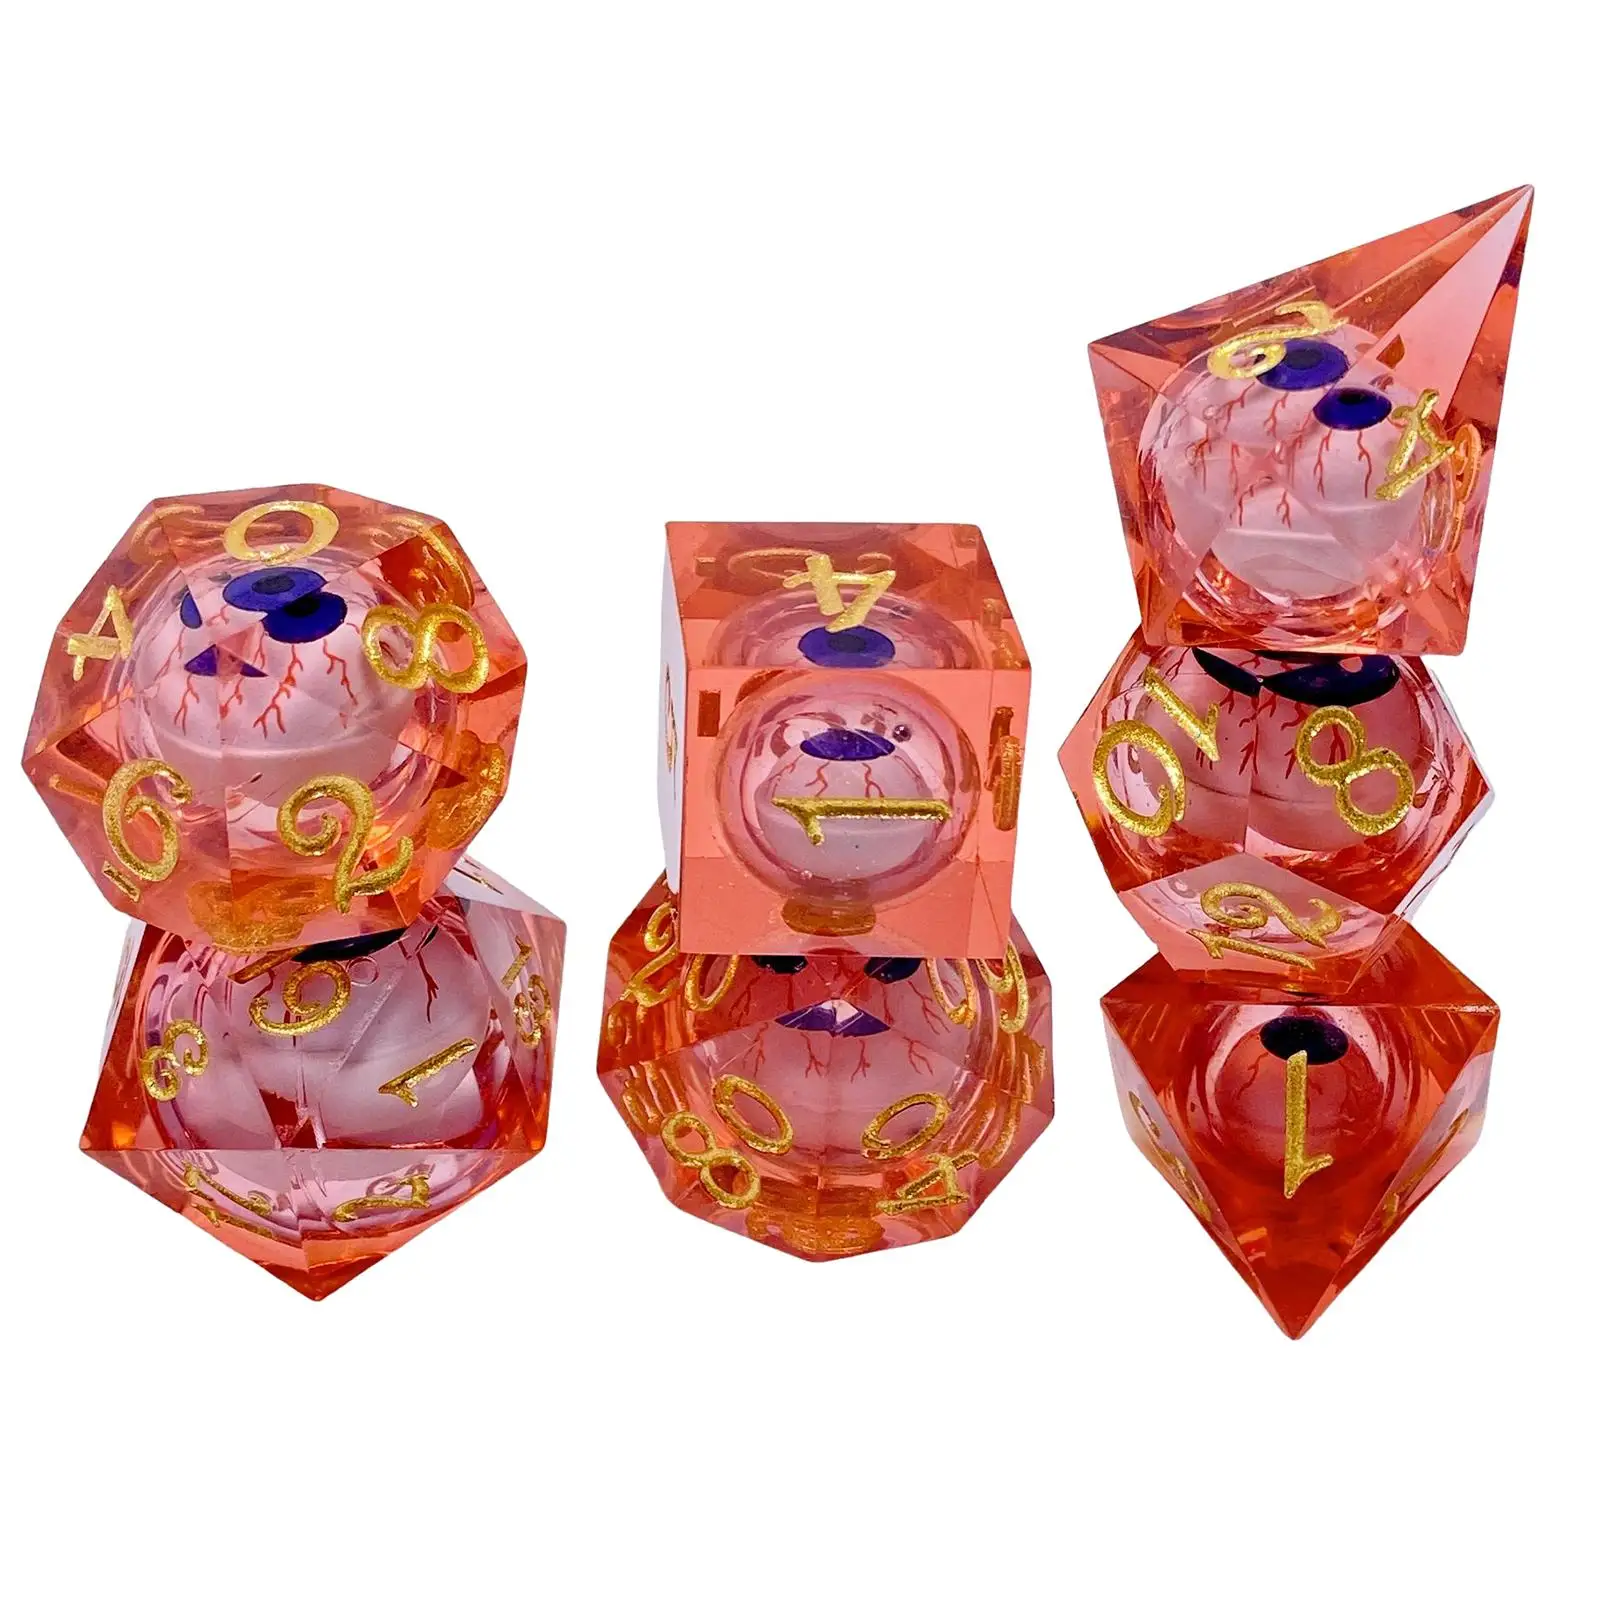 7x Resin Dices Set Multi Side Dice Set Family Games Accessaries for Party Favors Math Learning Table Board Wedding